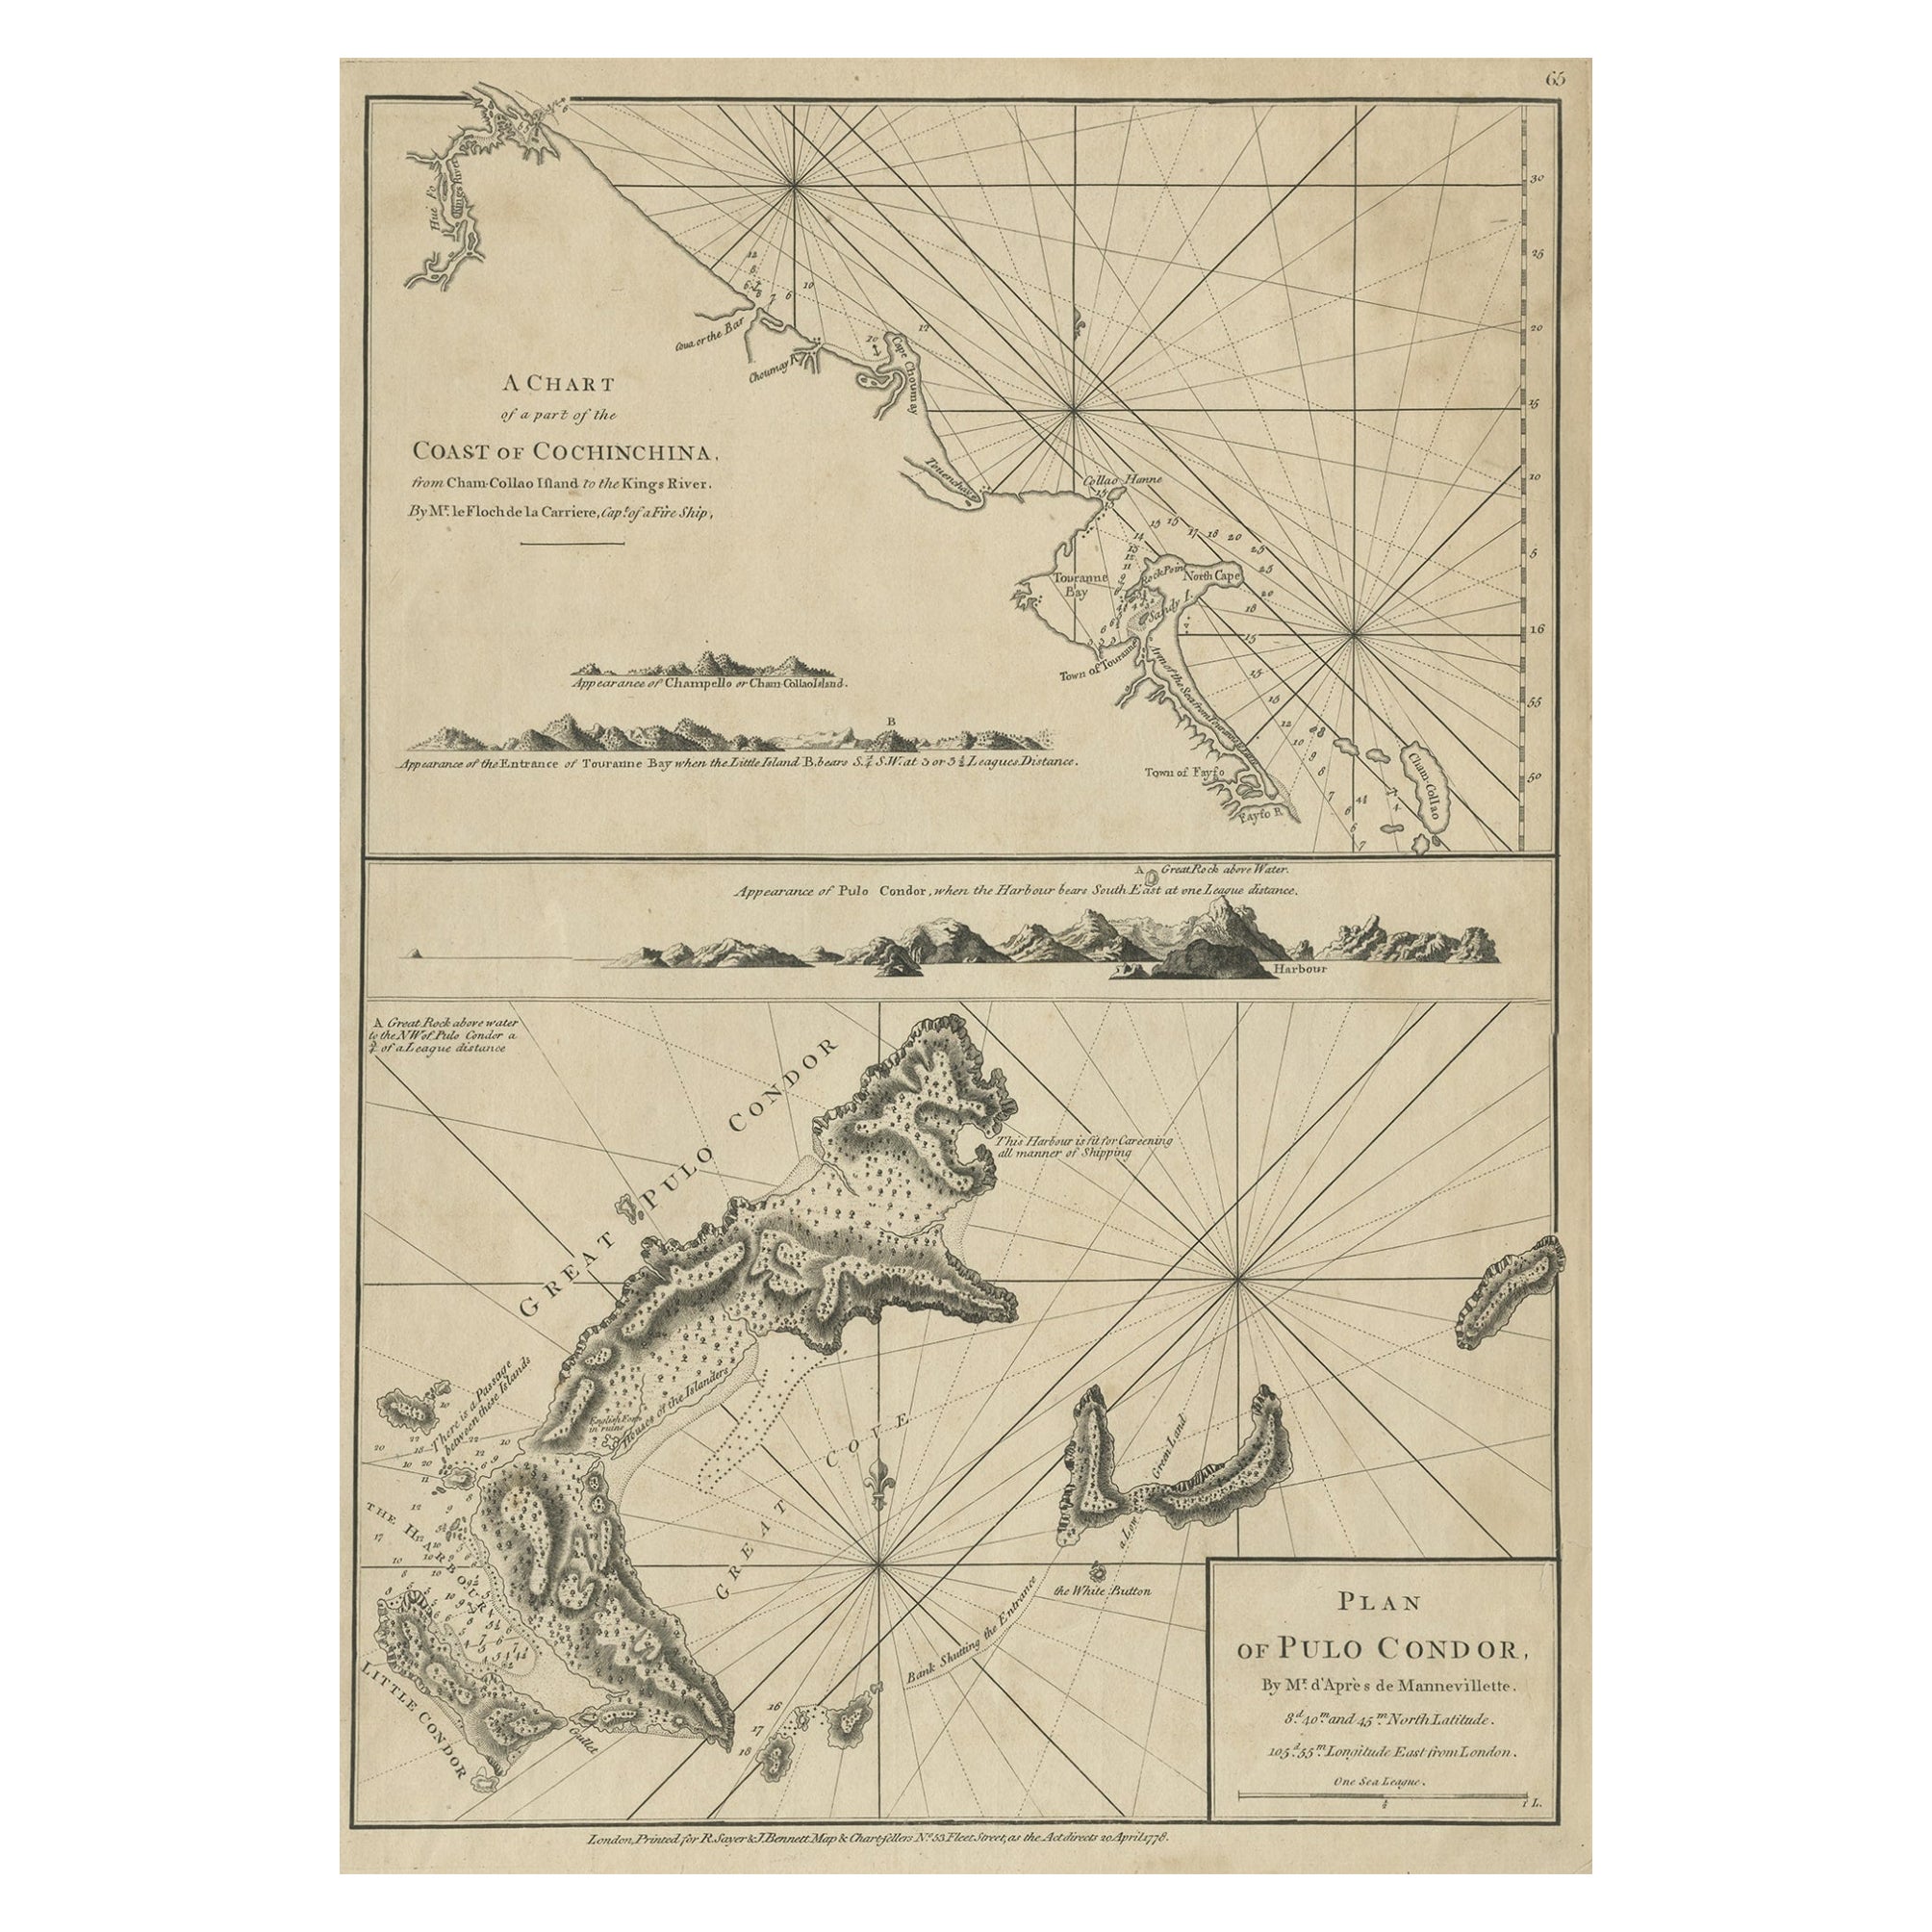 Chart of the Coast of Cochinchina' and 'Plan of Pulo Condor', Vietnam, 1778